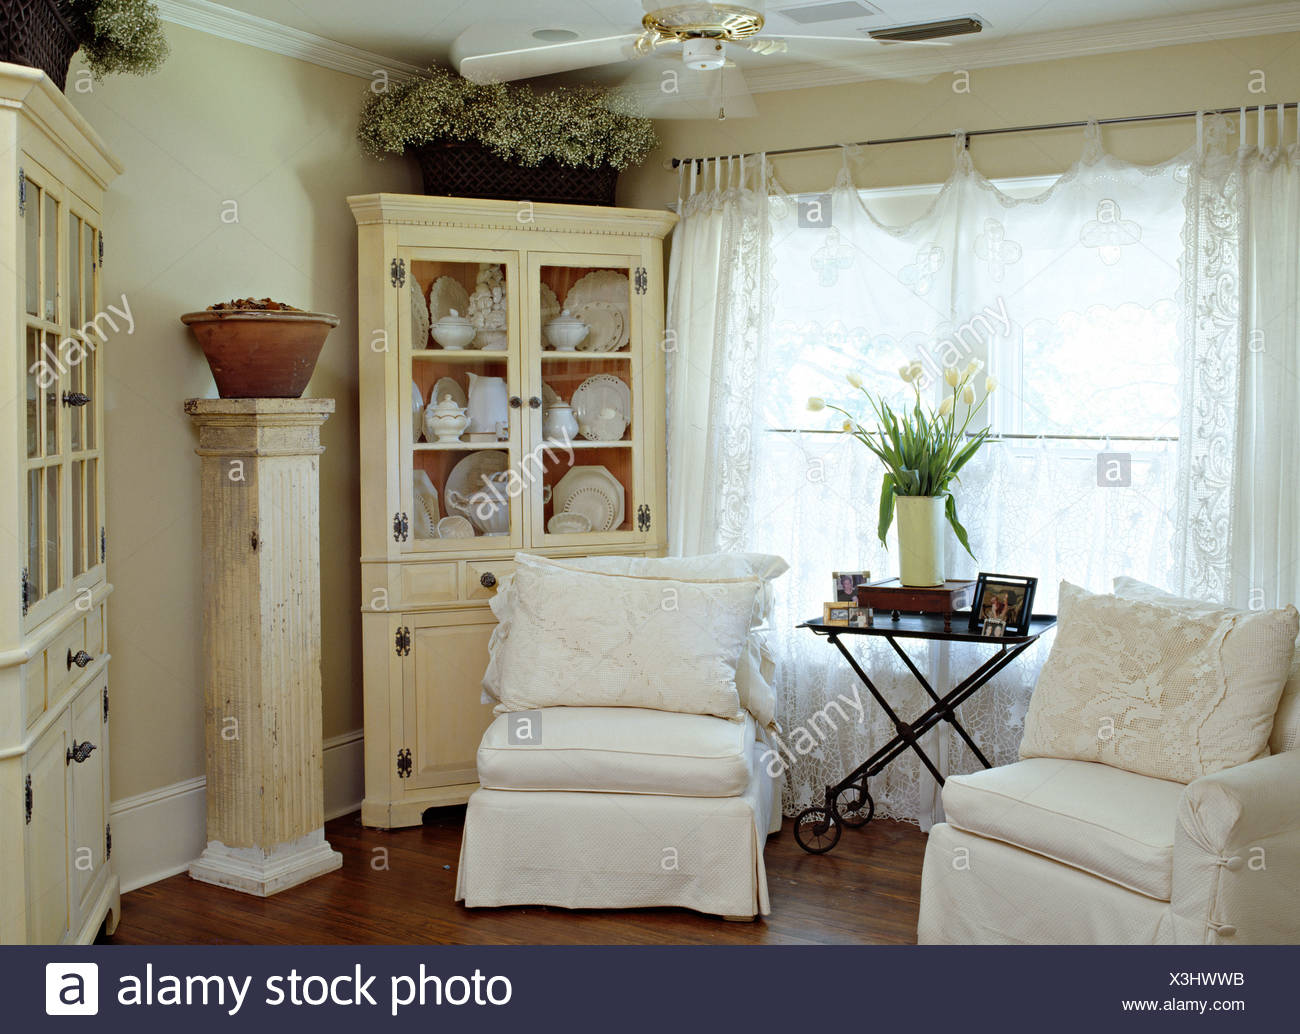 White Loose Covers On Chairs In Front Of Window With Lace Curtains